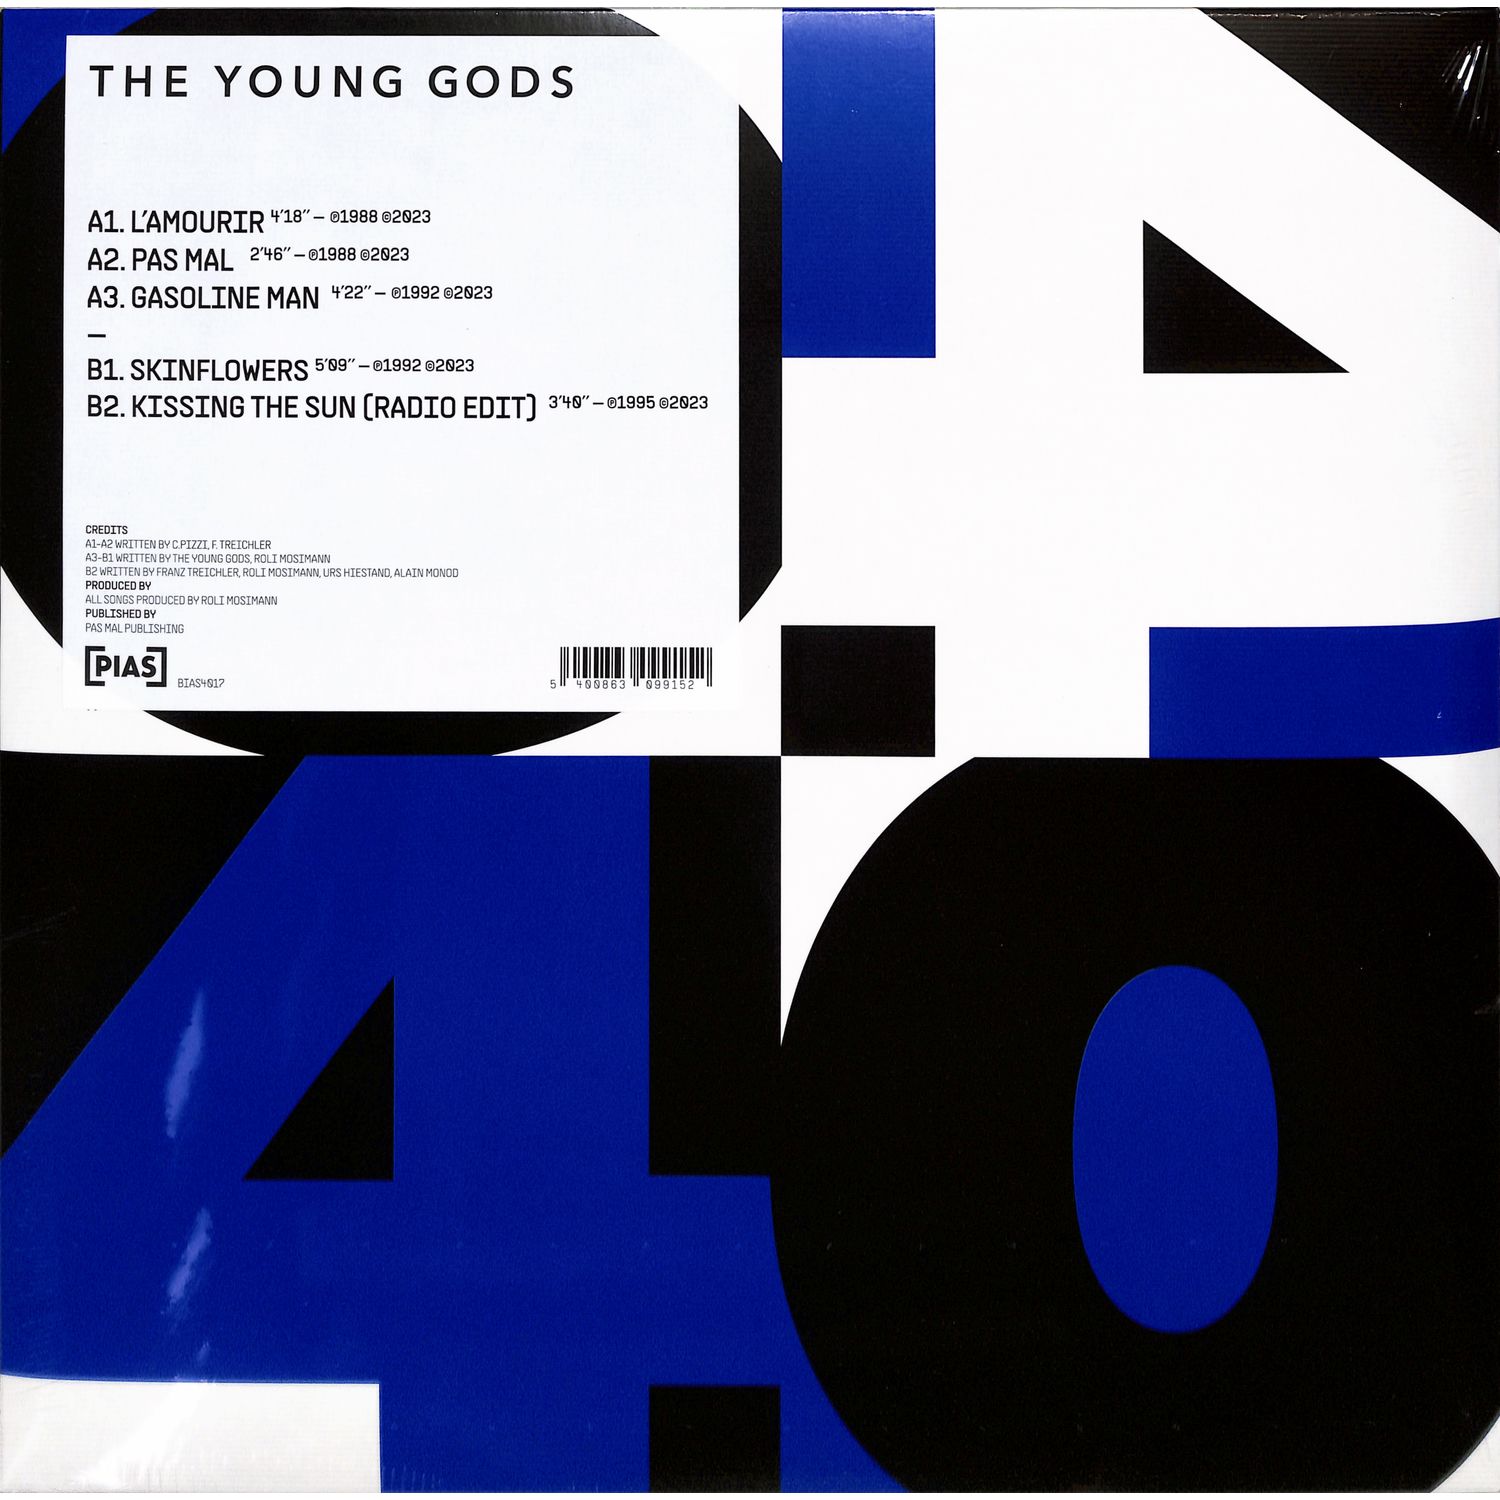 The Young Gods - PIAS 40 